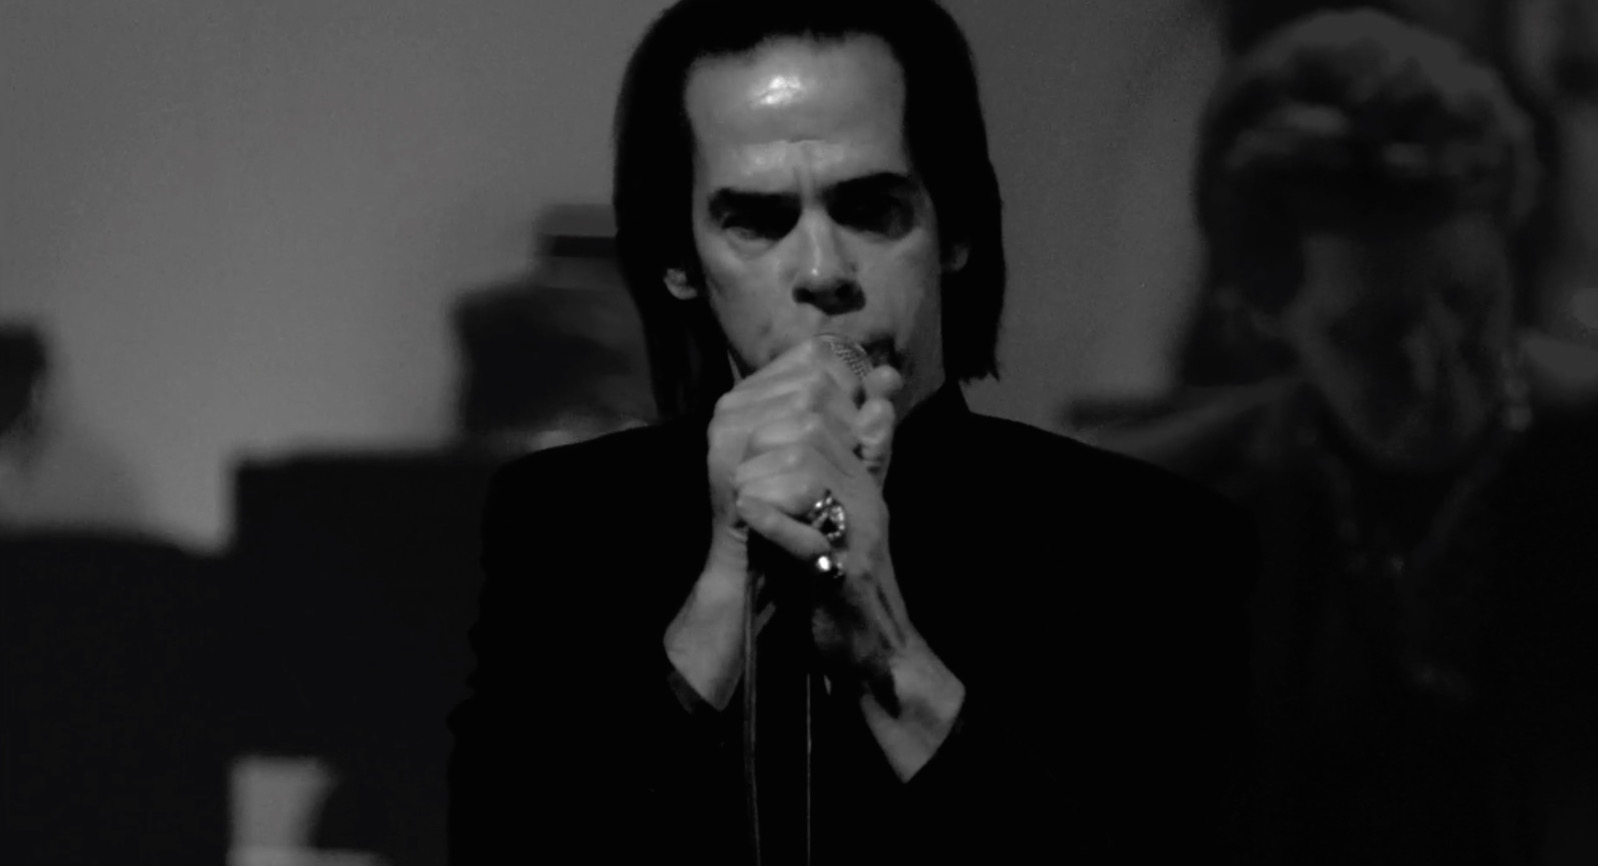 Nick Cave and the Bad Seeds has new compilation album set, announces world tour - Photo courtesy Nick Cave